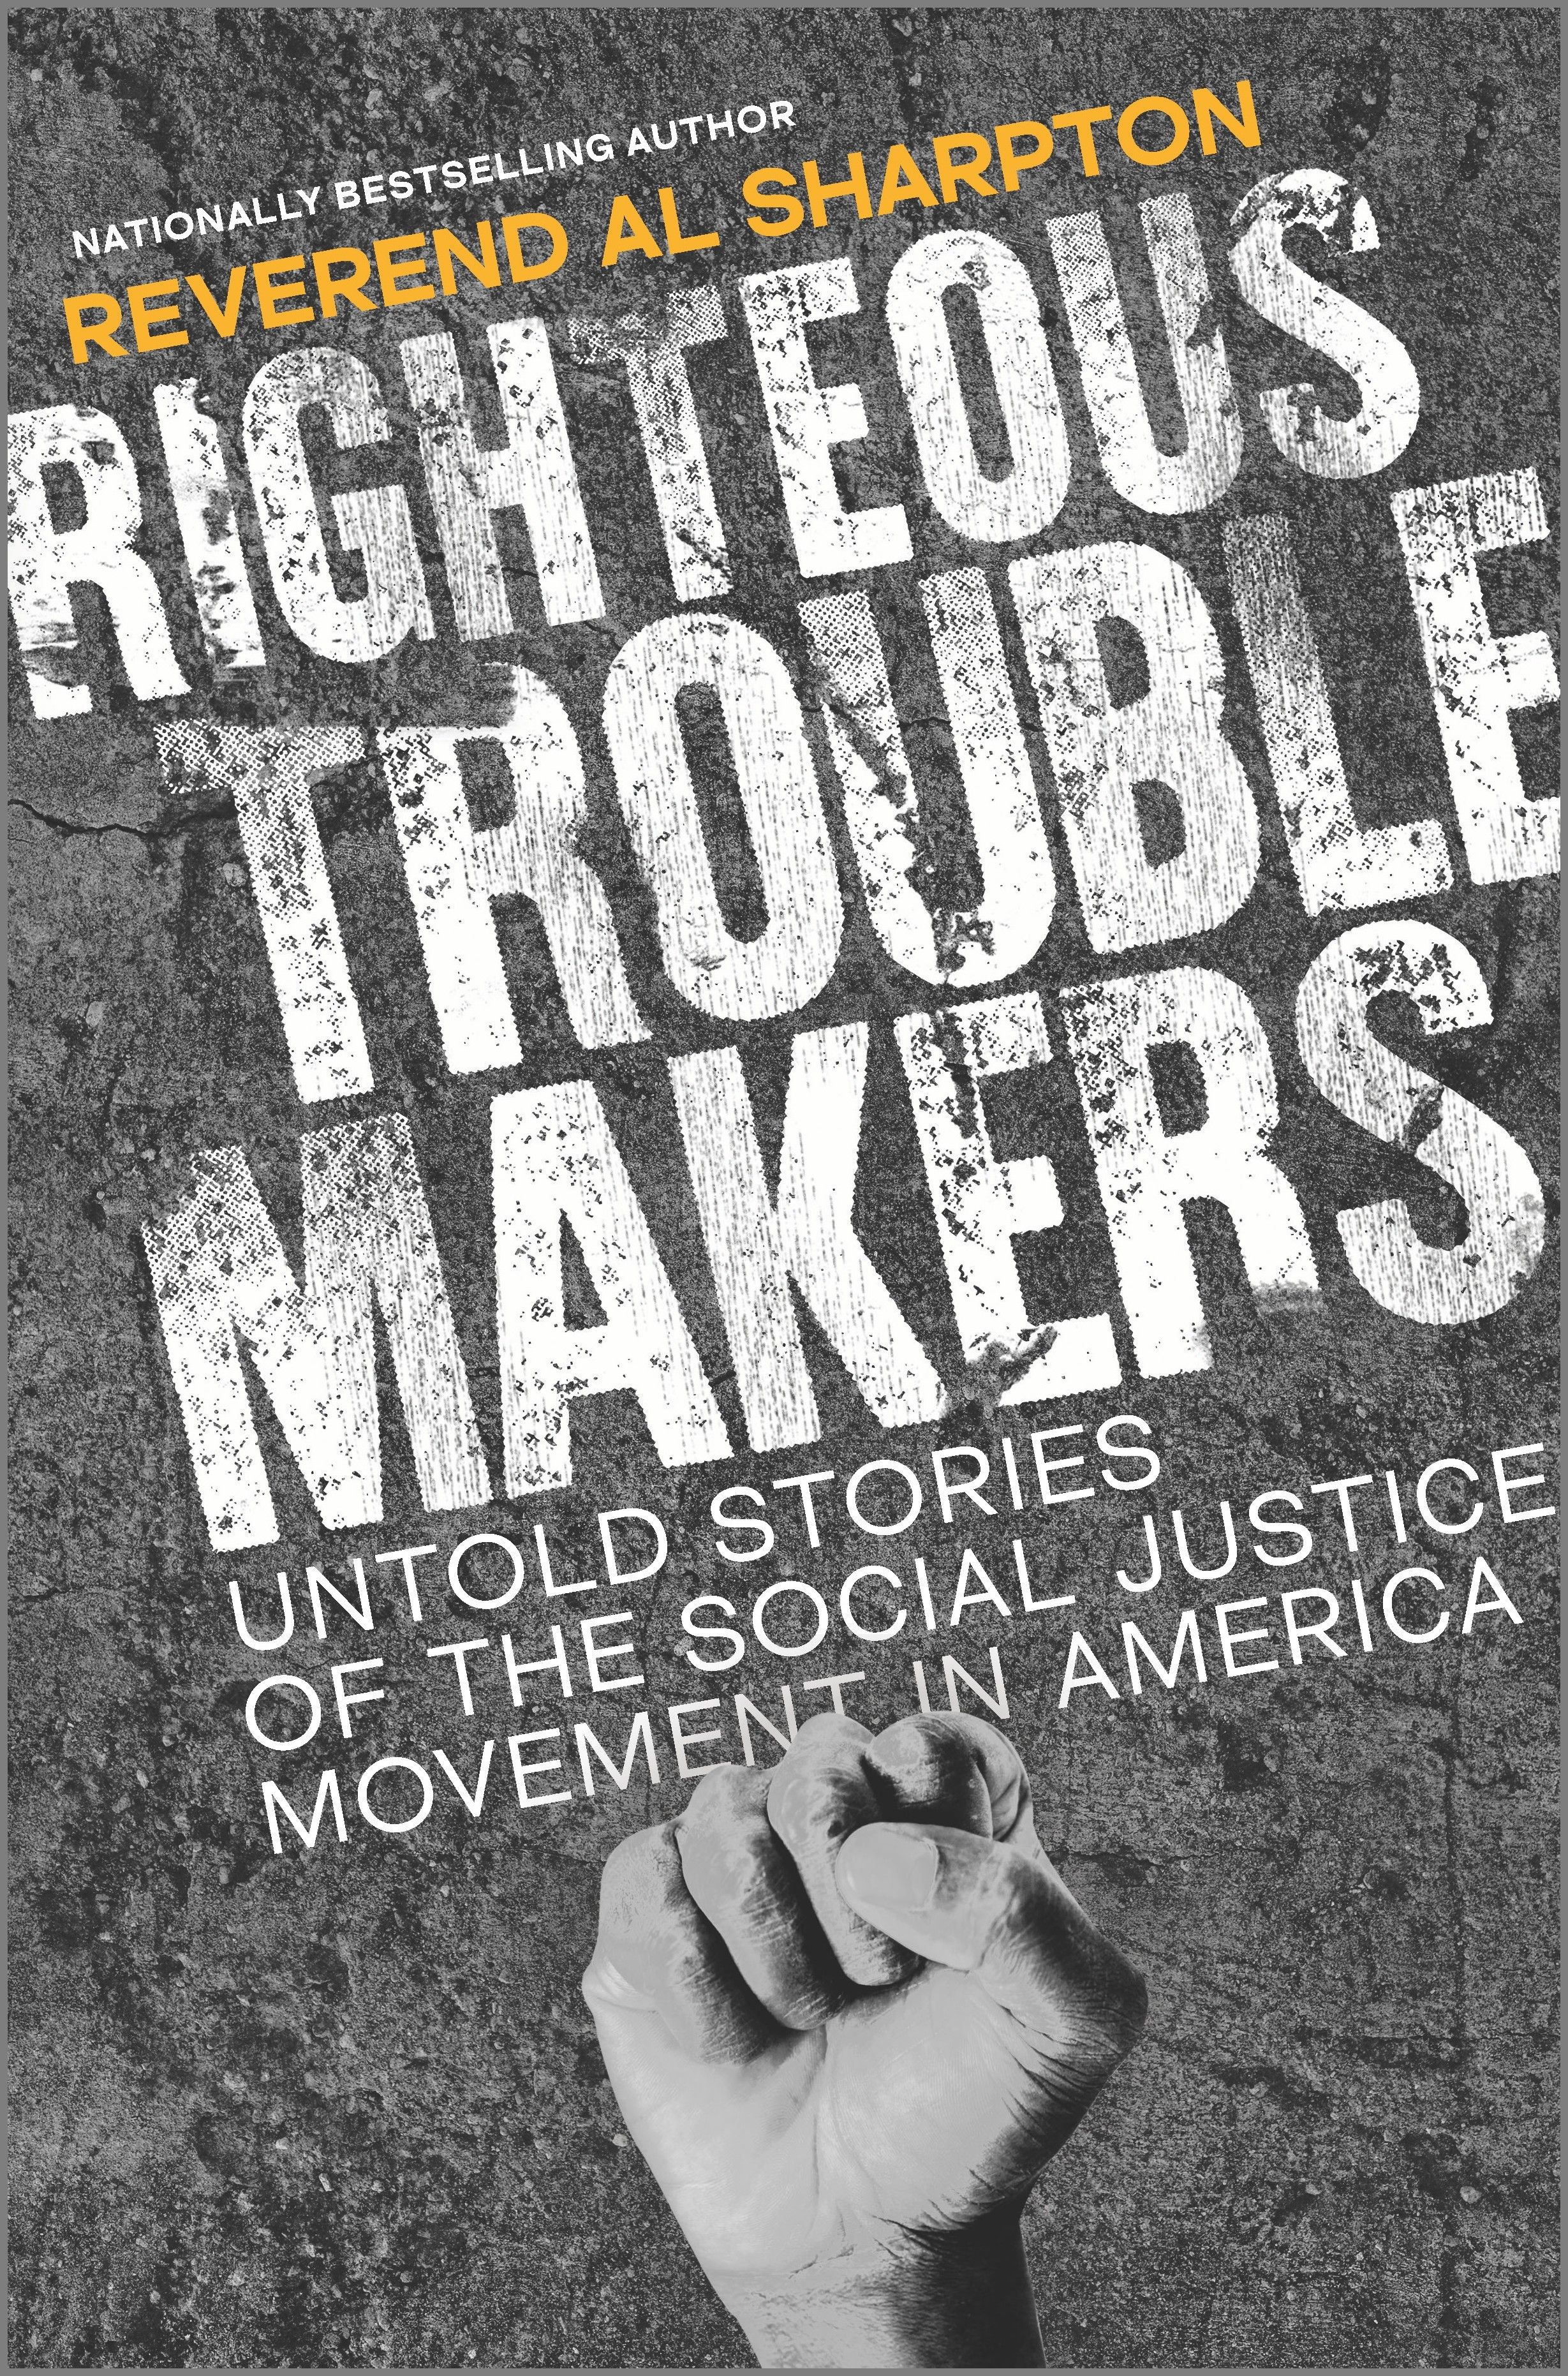 Righteous Troublemakers by Reverend Al Sharpton